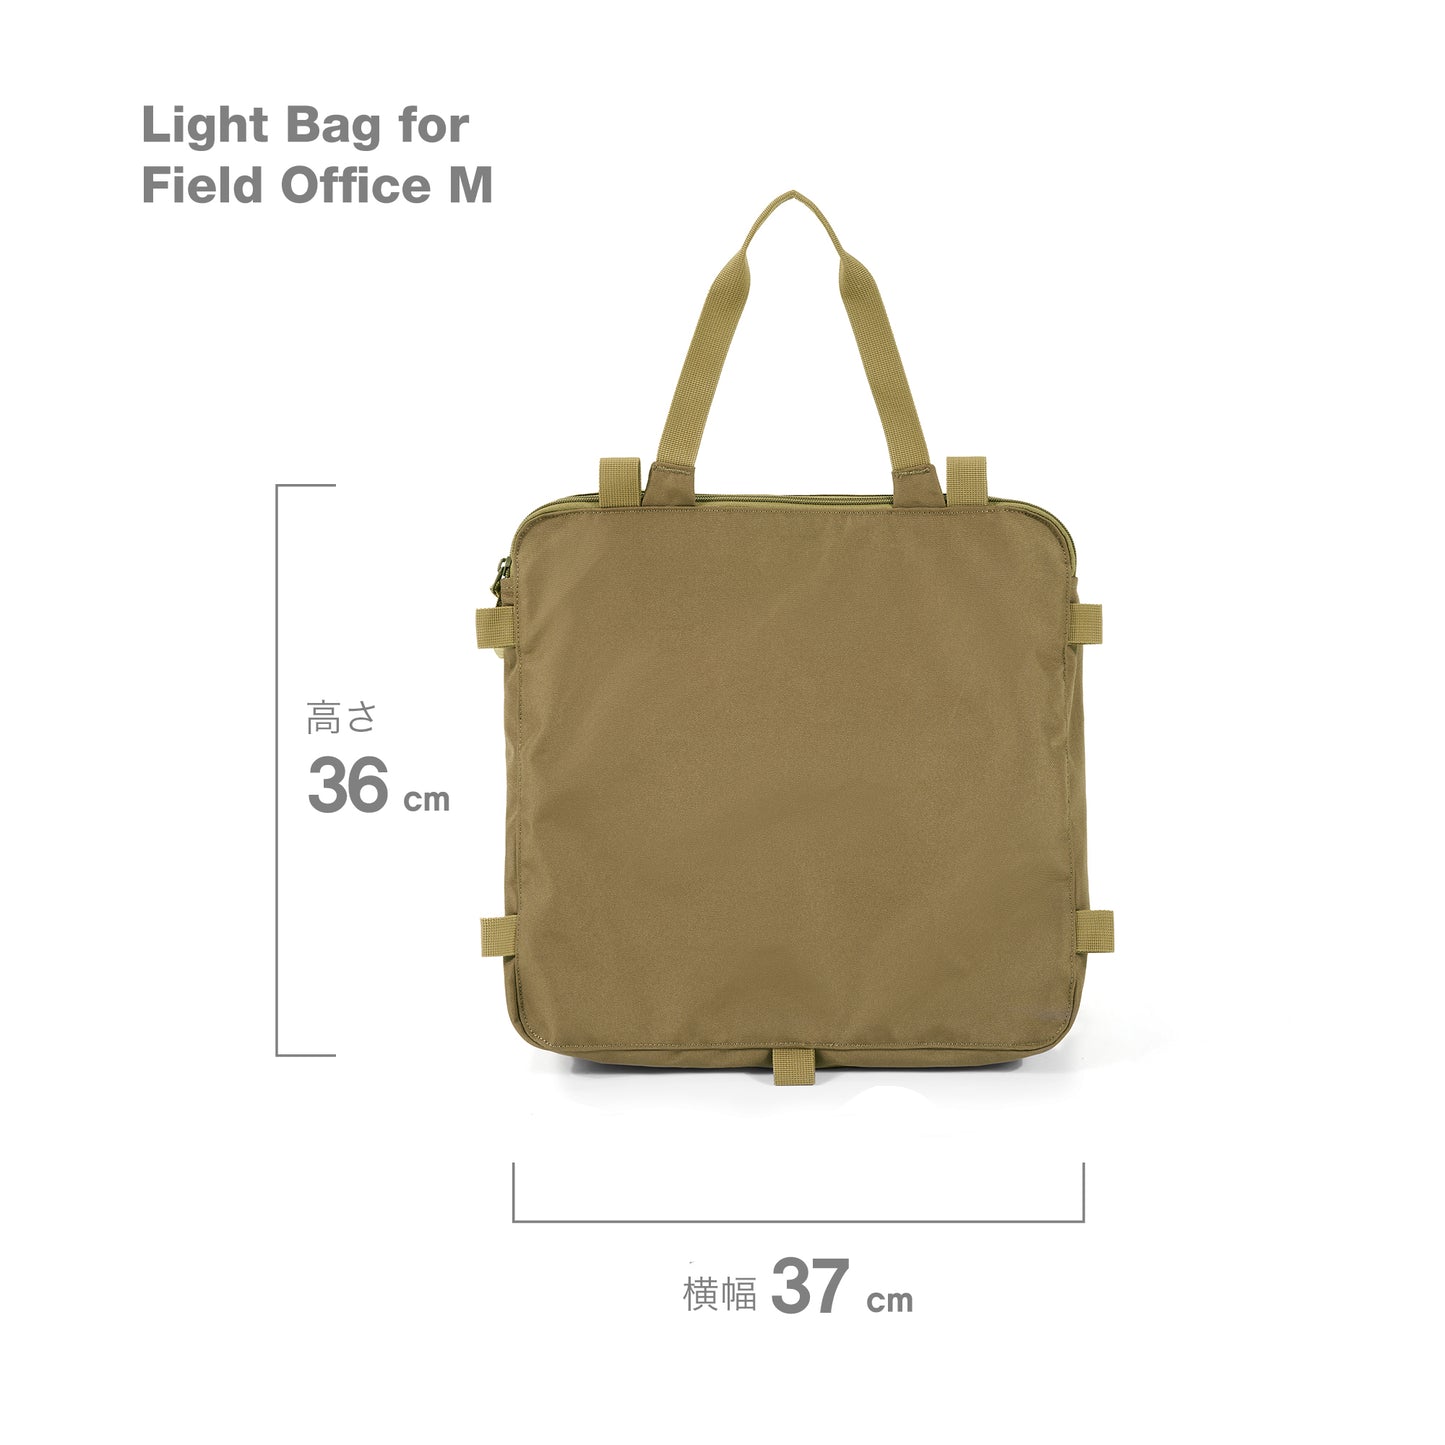 Light Bag for Tac.Field office M - Coyote Tan